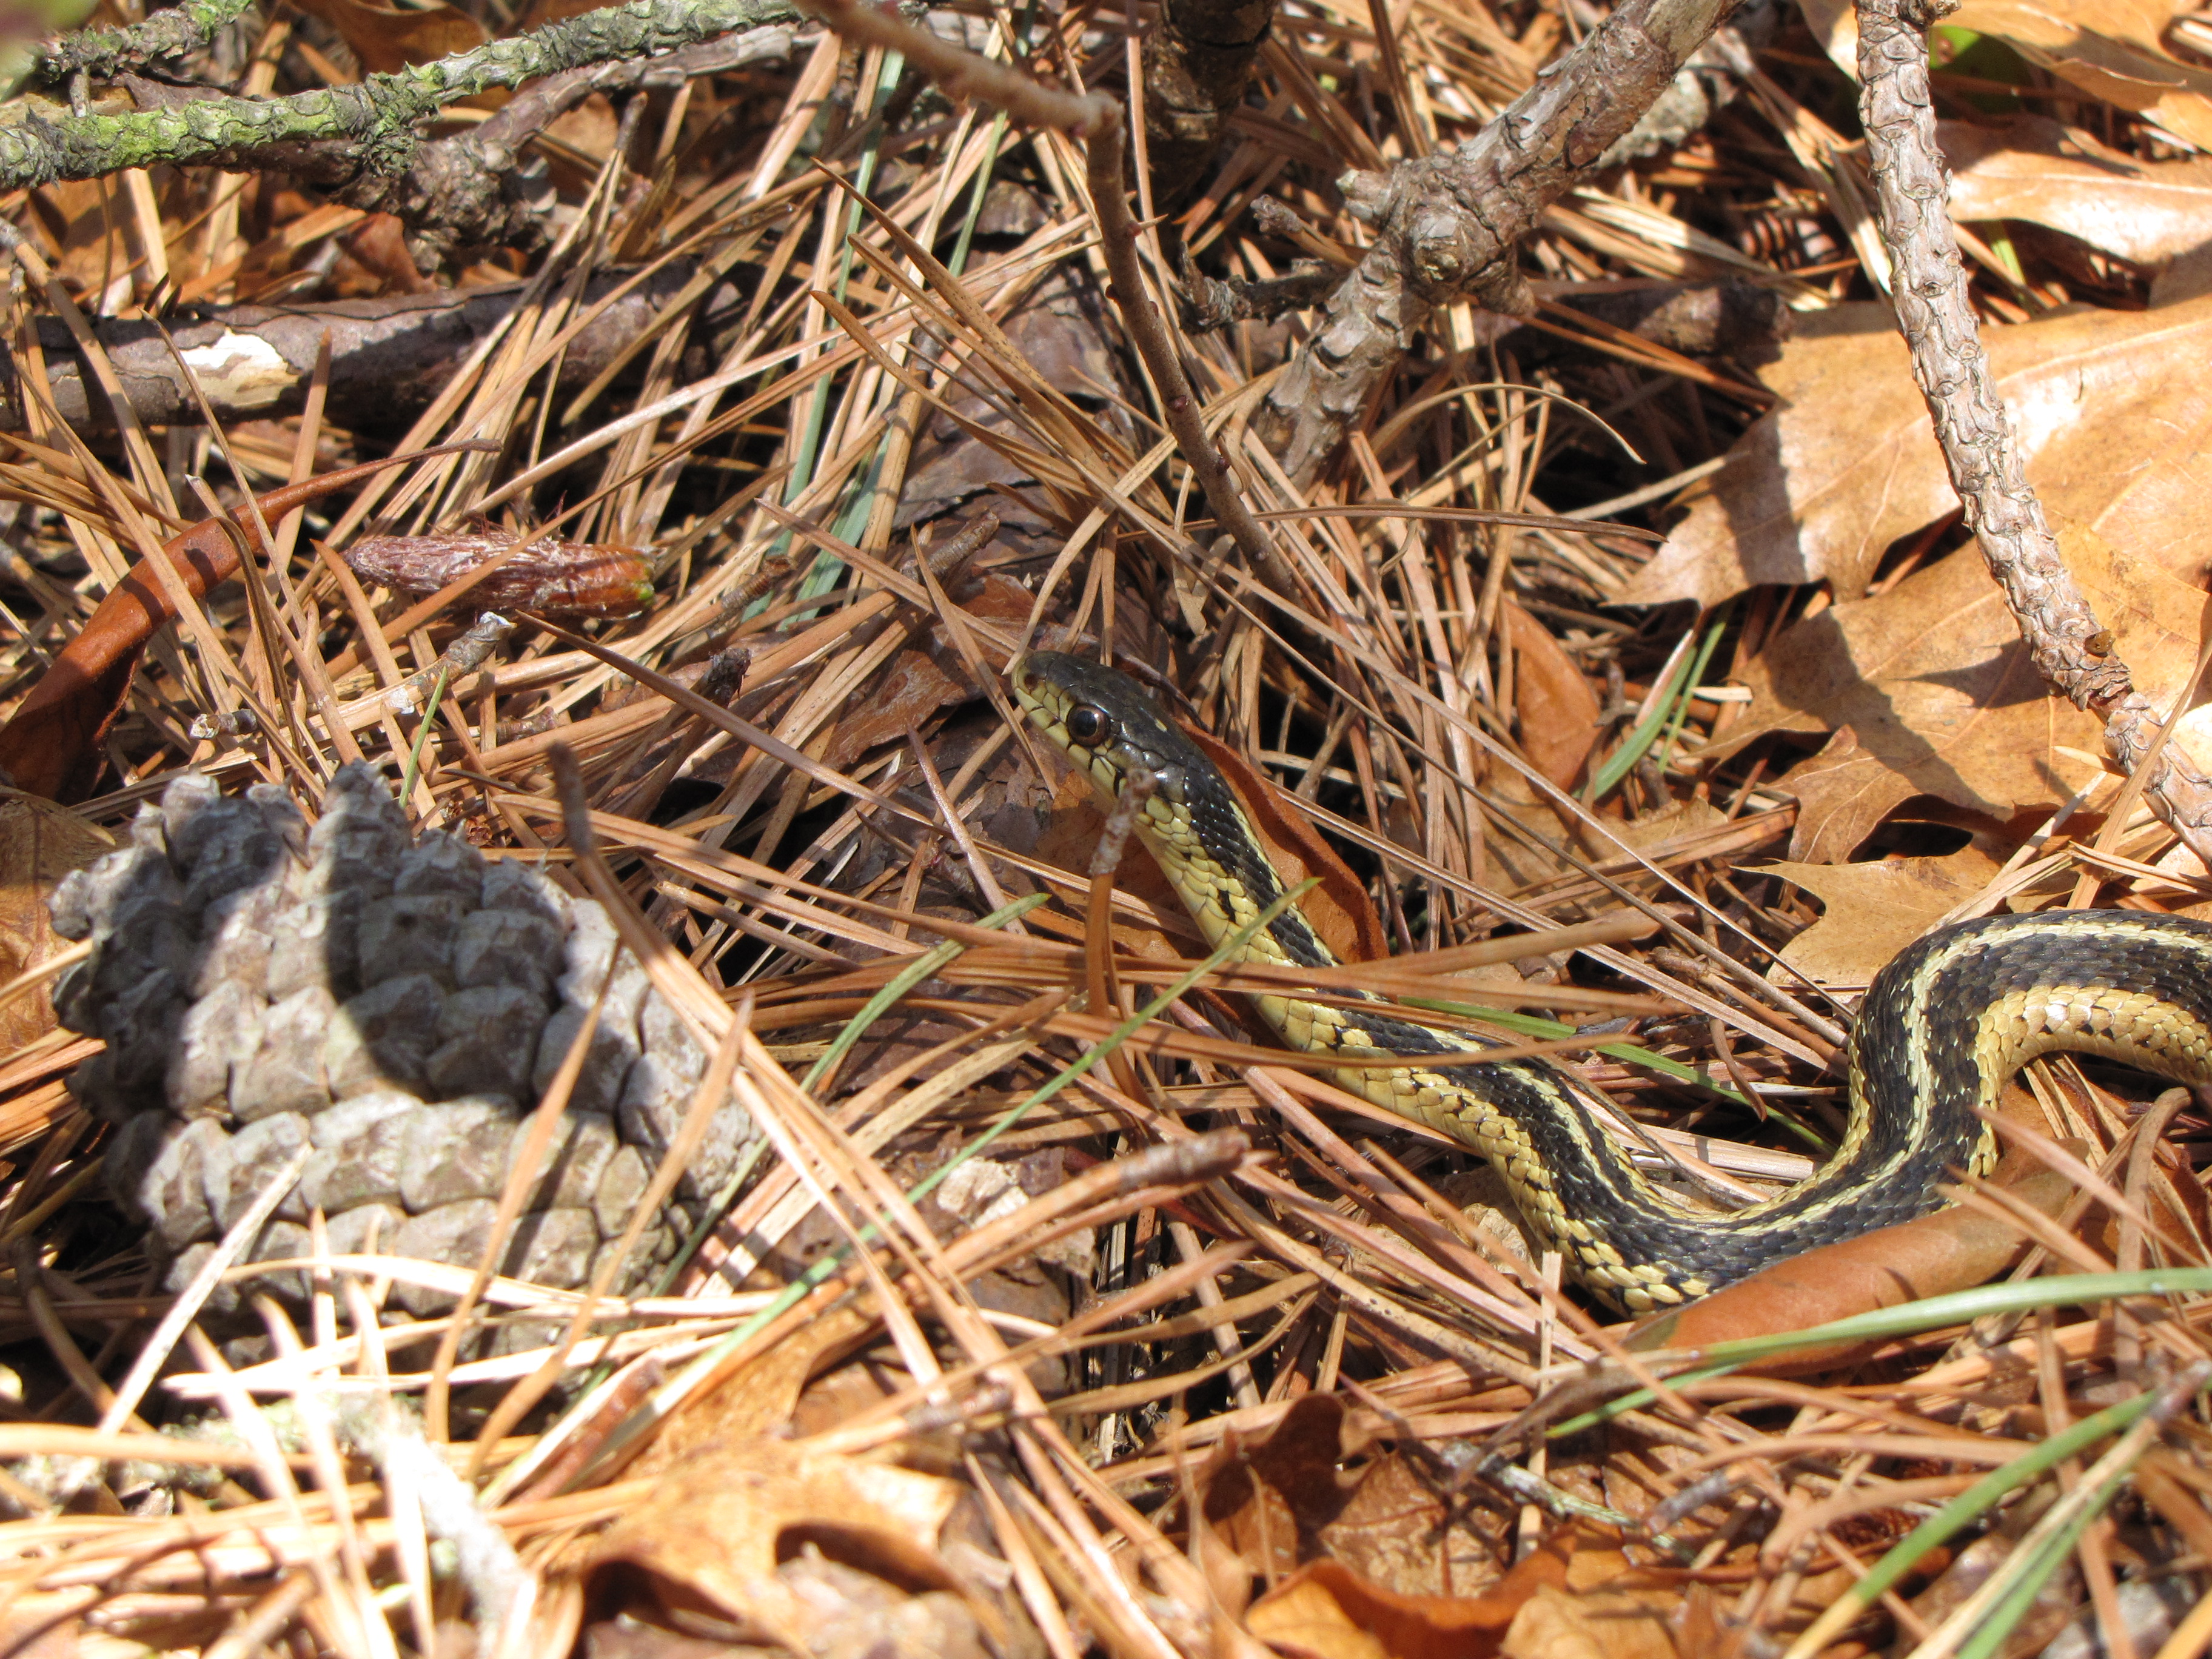 Garter snake makes it through a forest floor covered with pine needles